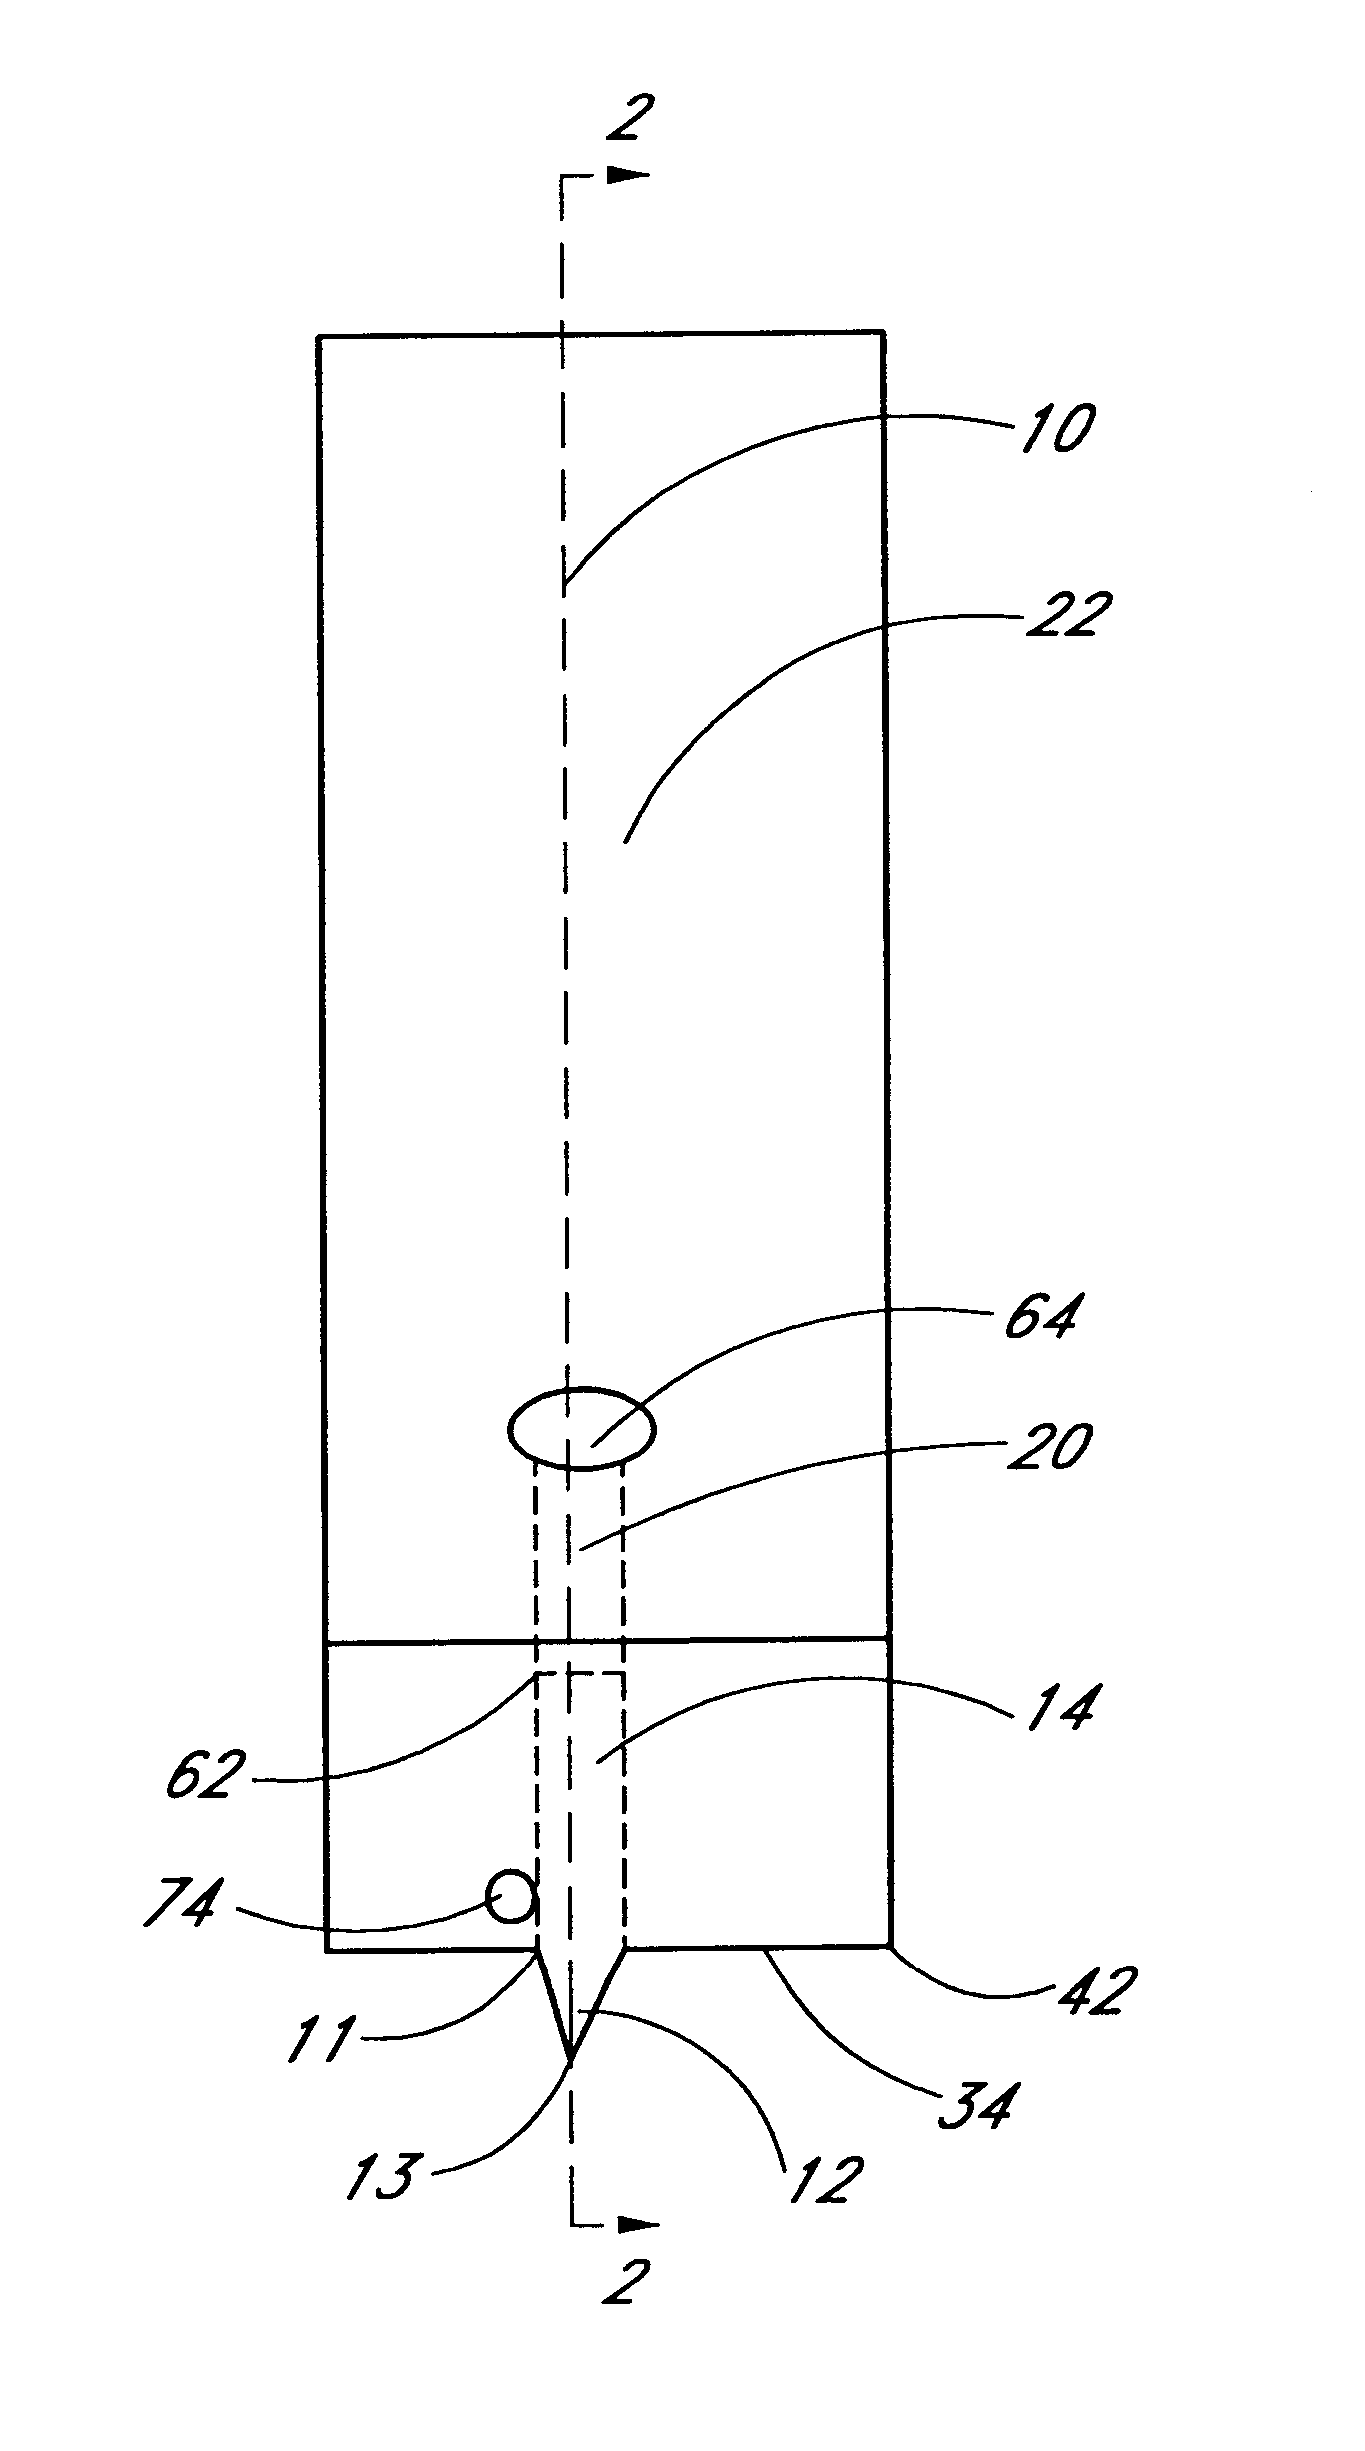 Method and device for sampling and analyzing interstitial fluid and whole blood samples